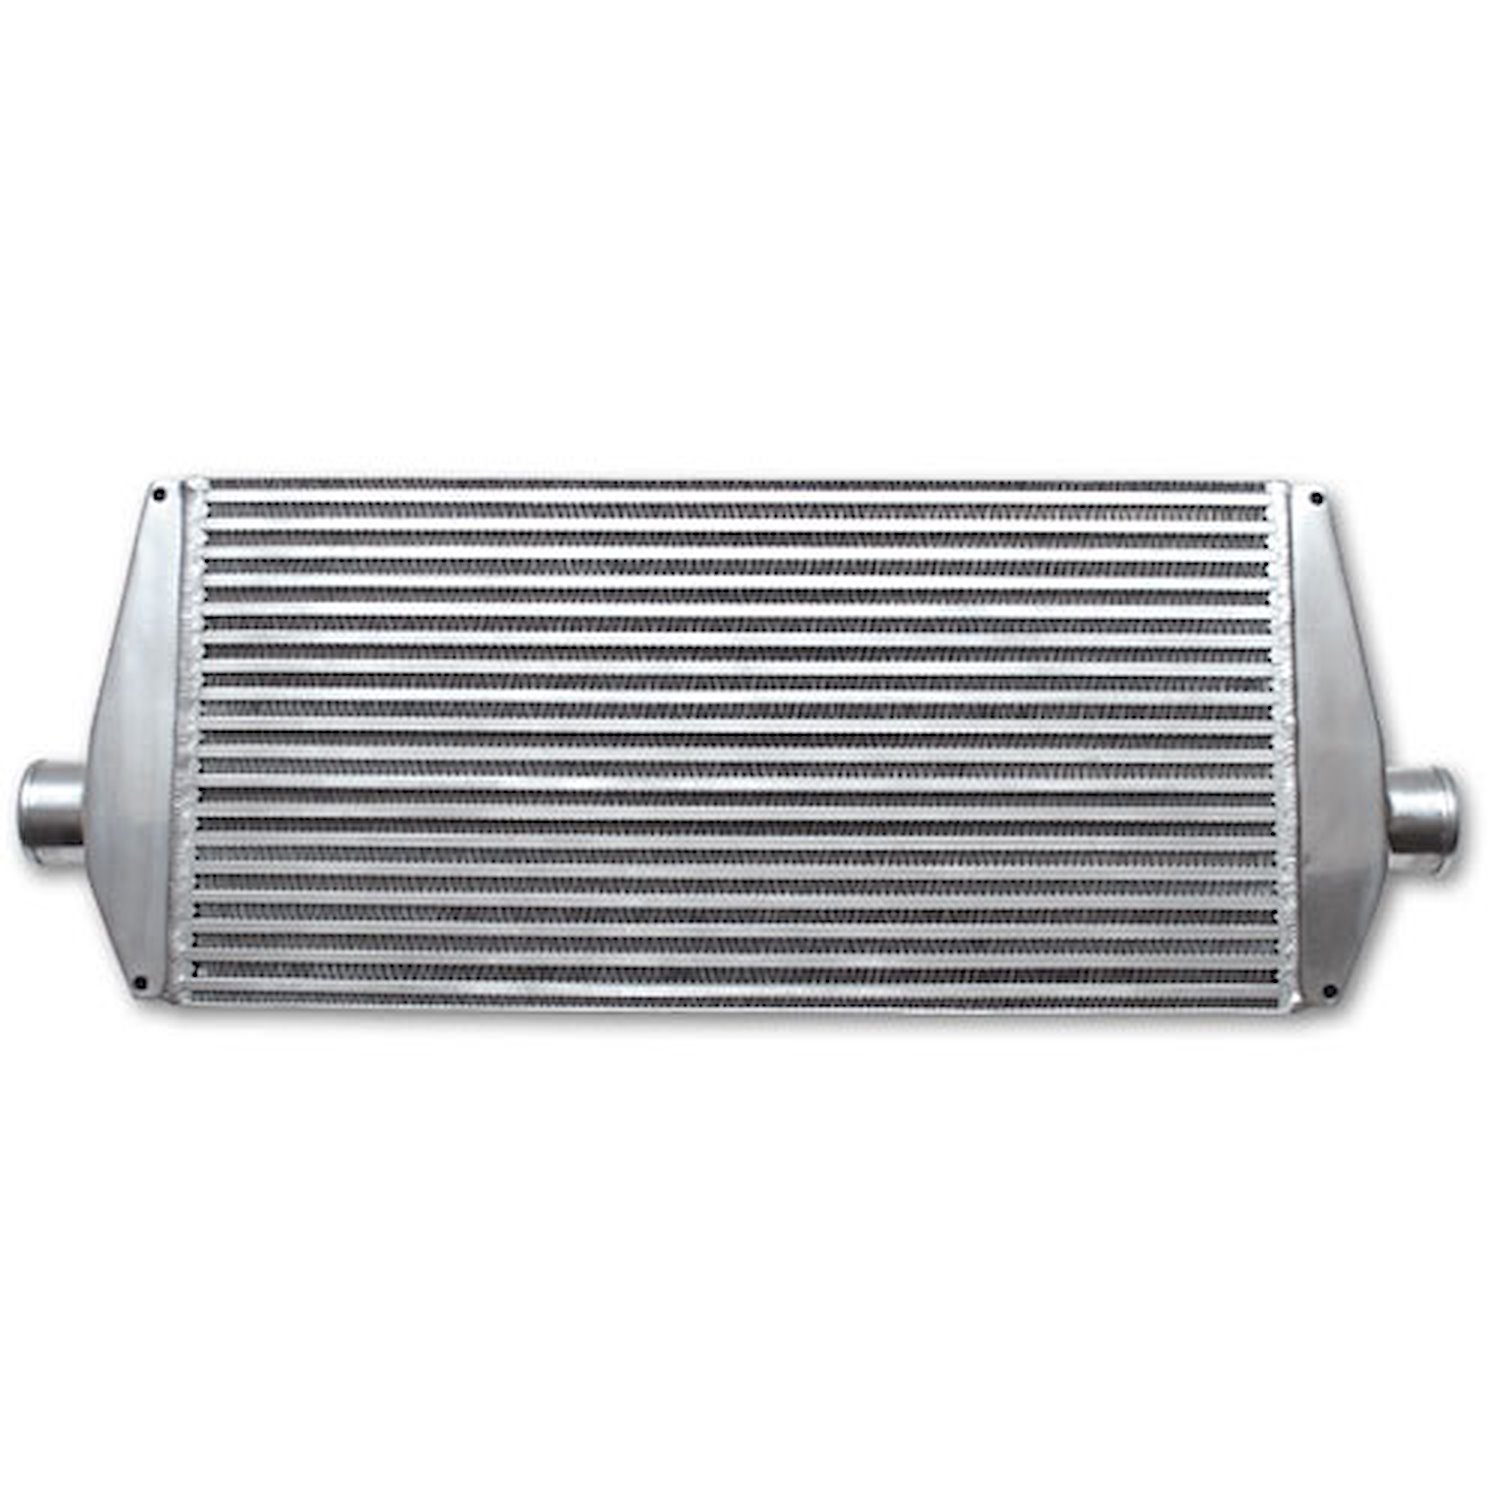 Air-to-Air Intercooler with End Tanks HP Rating: 550